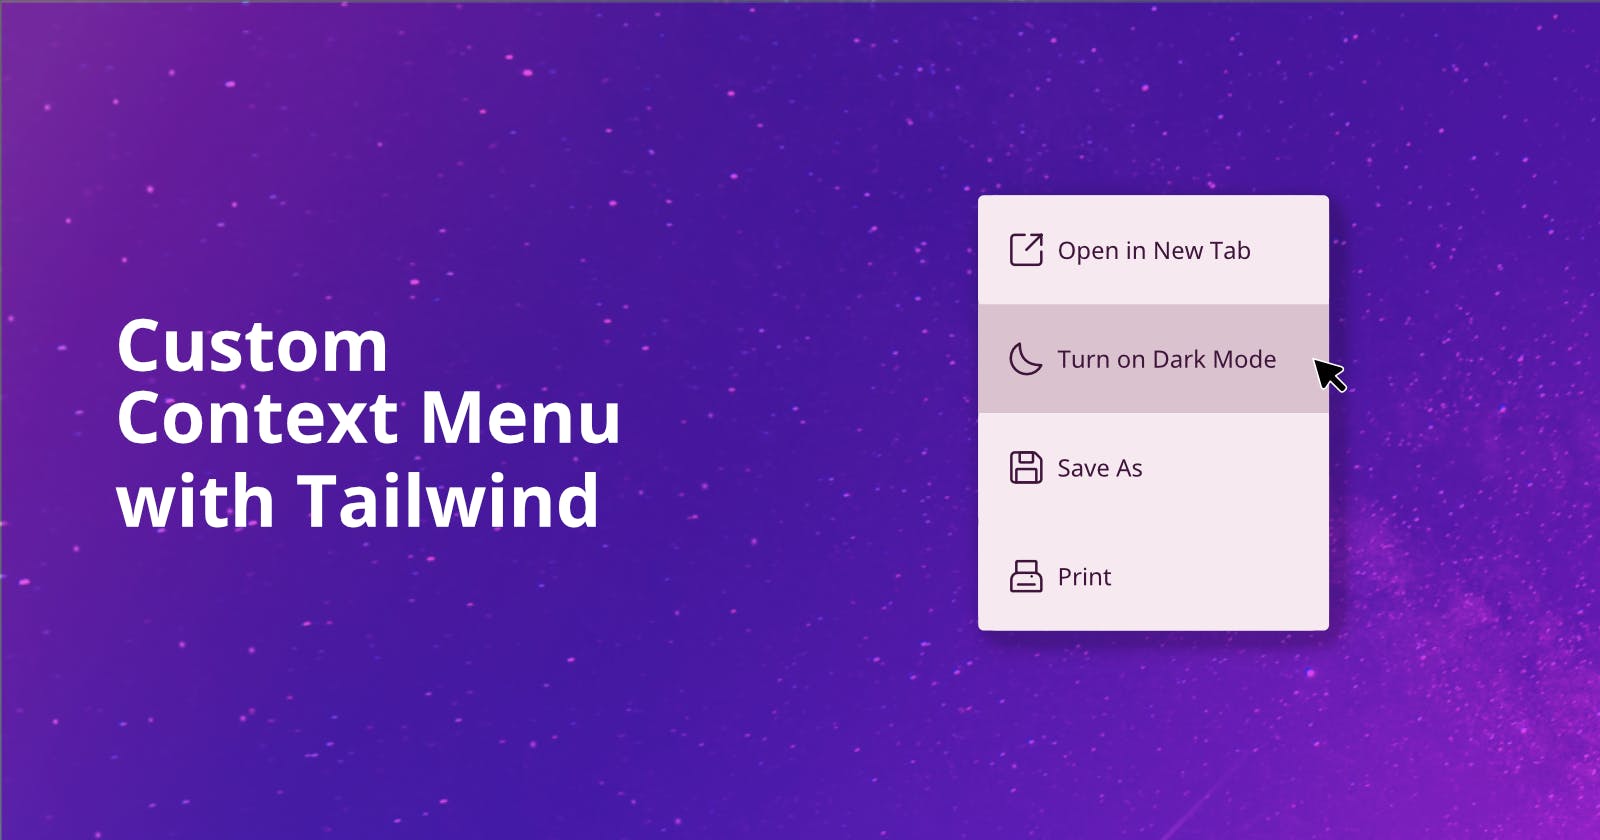 Build a Custom Context Menu with Tailwind and JavaScript